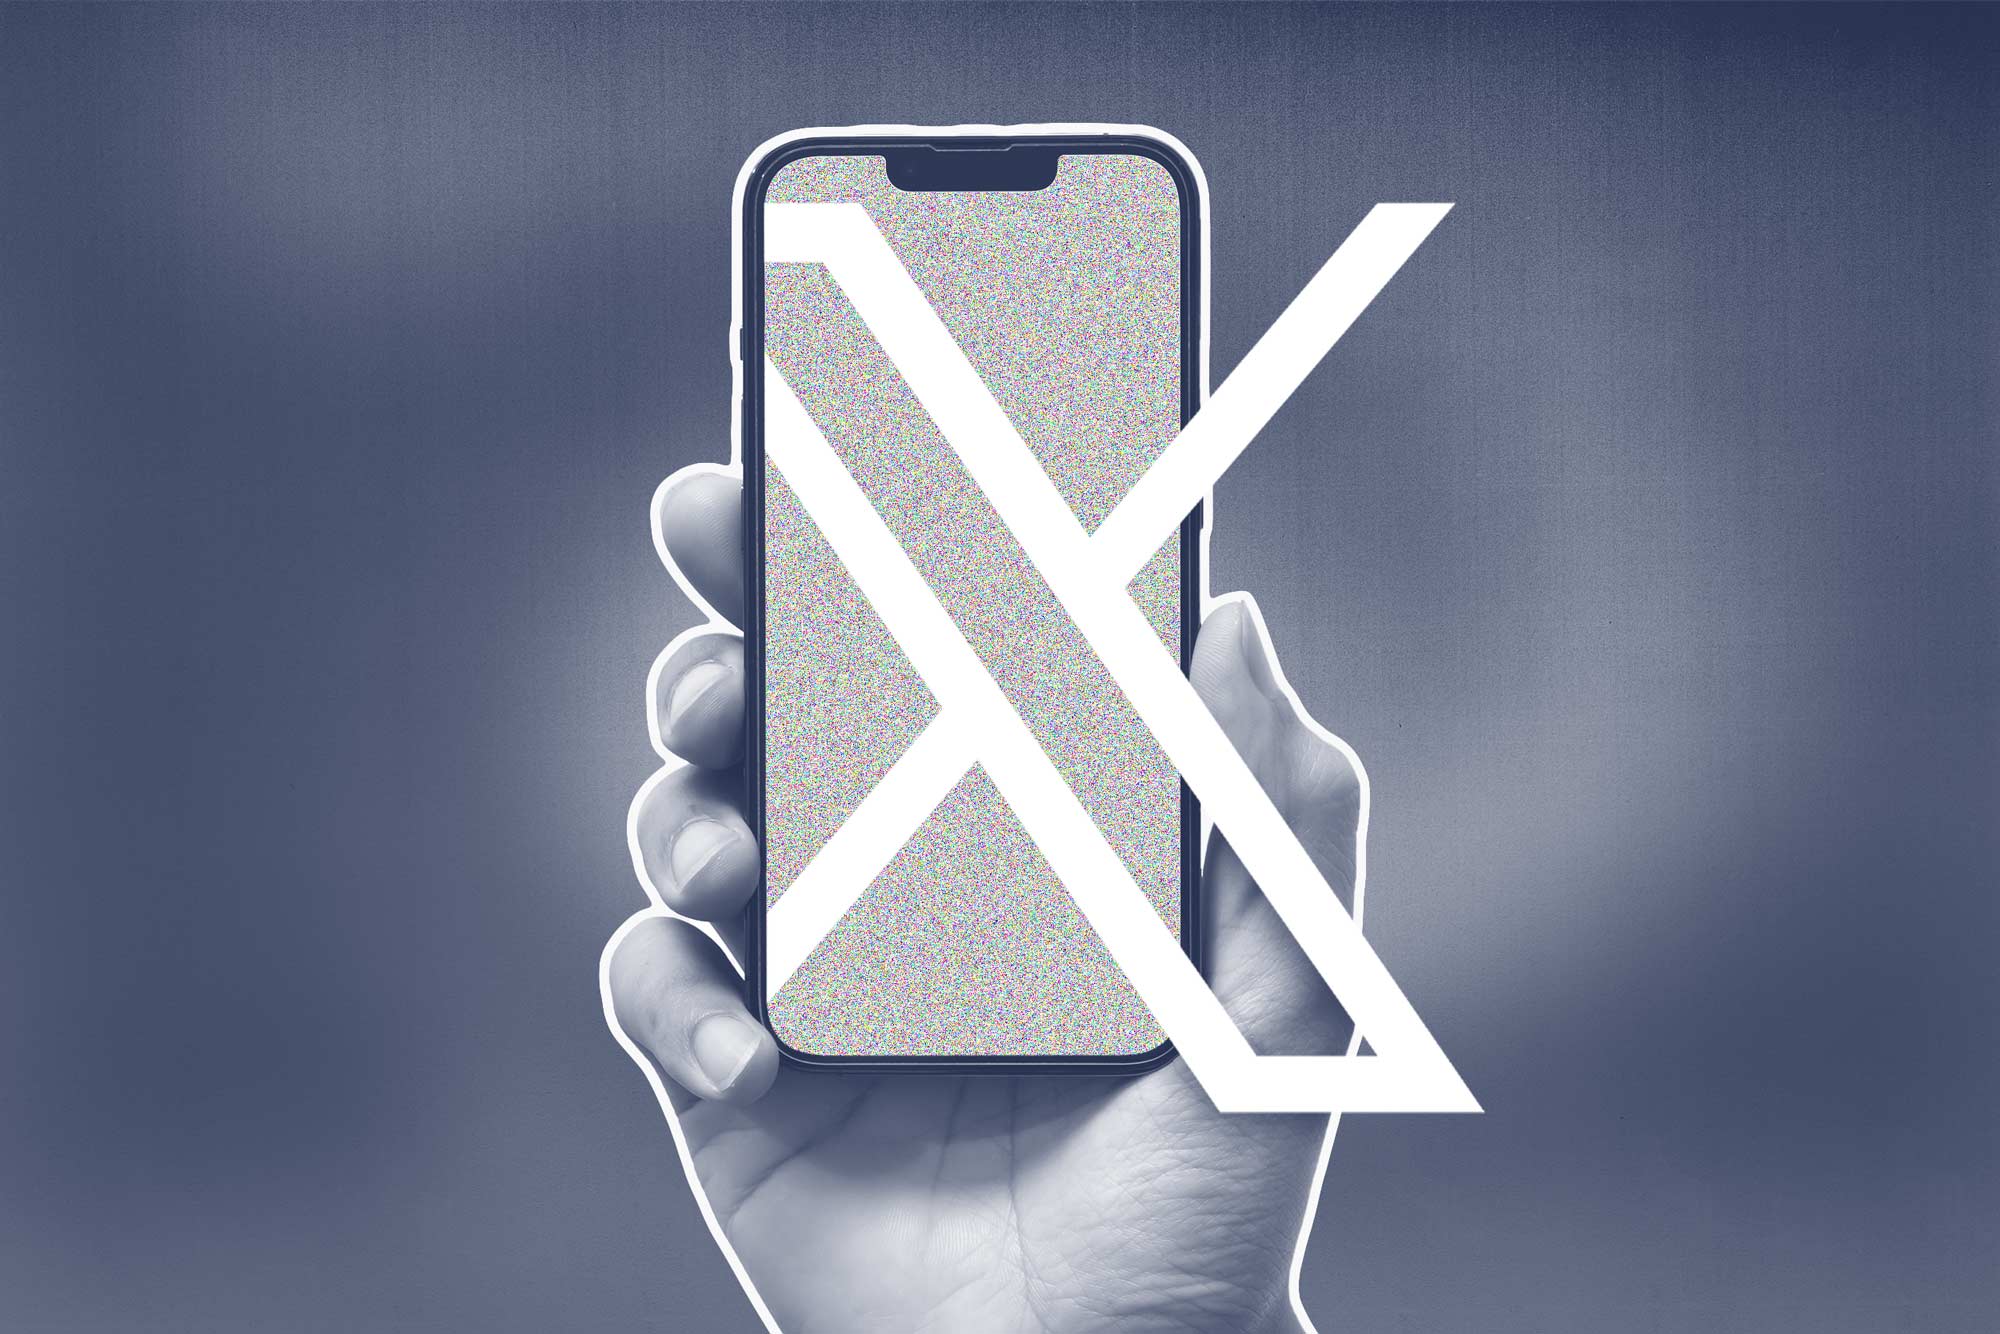 Graphic of a smartphone with an X and blue overlay